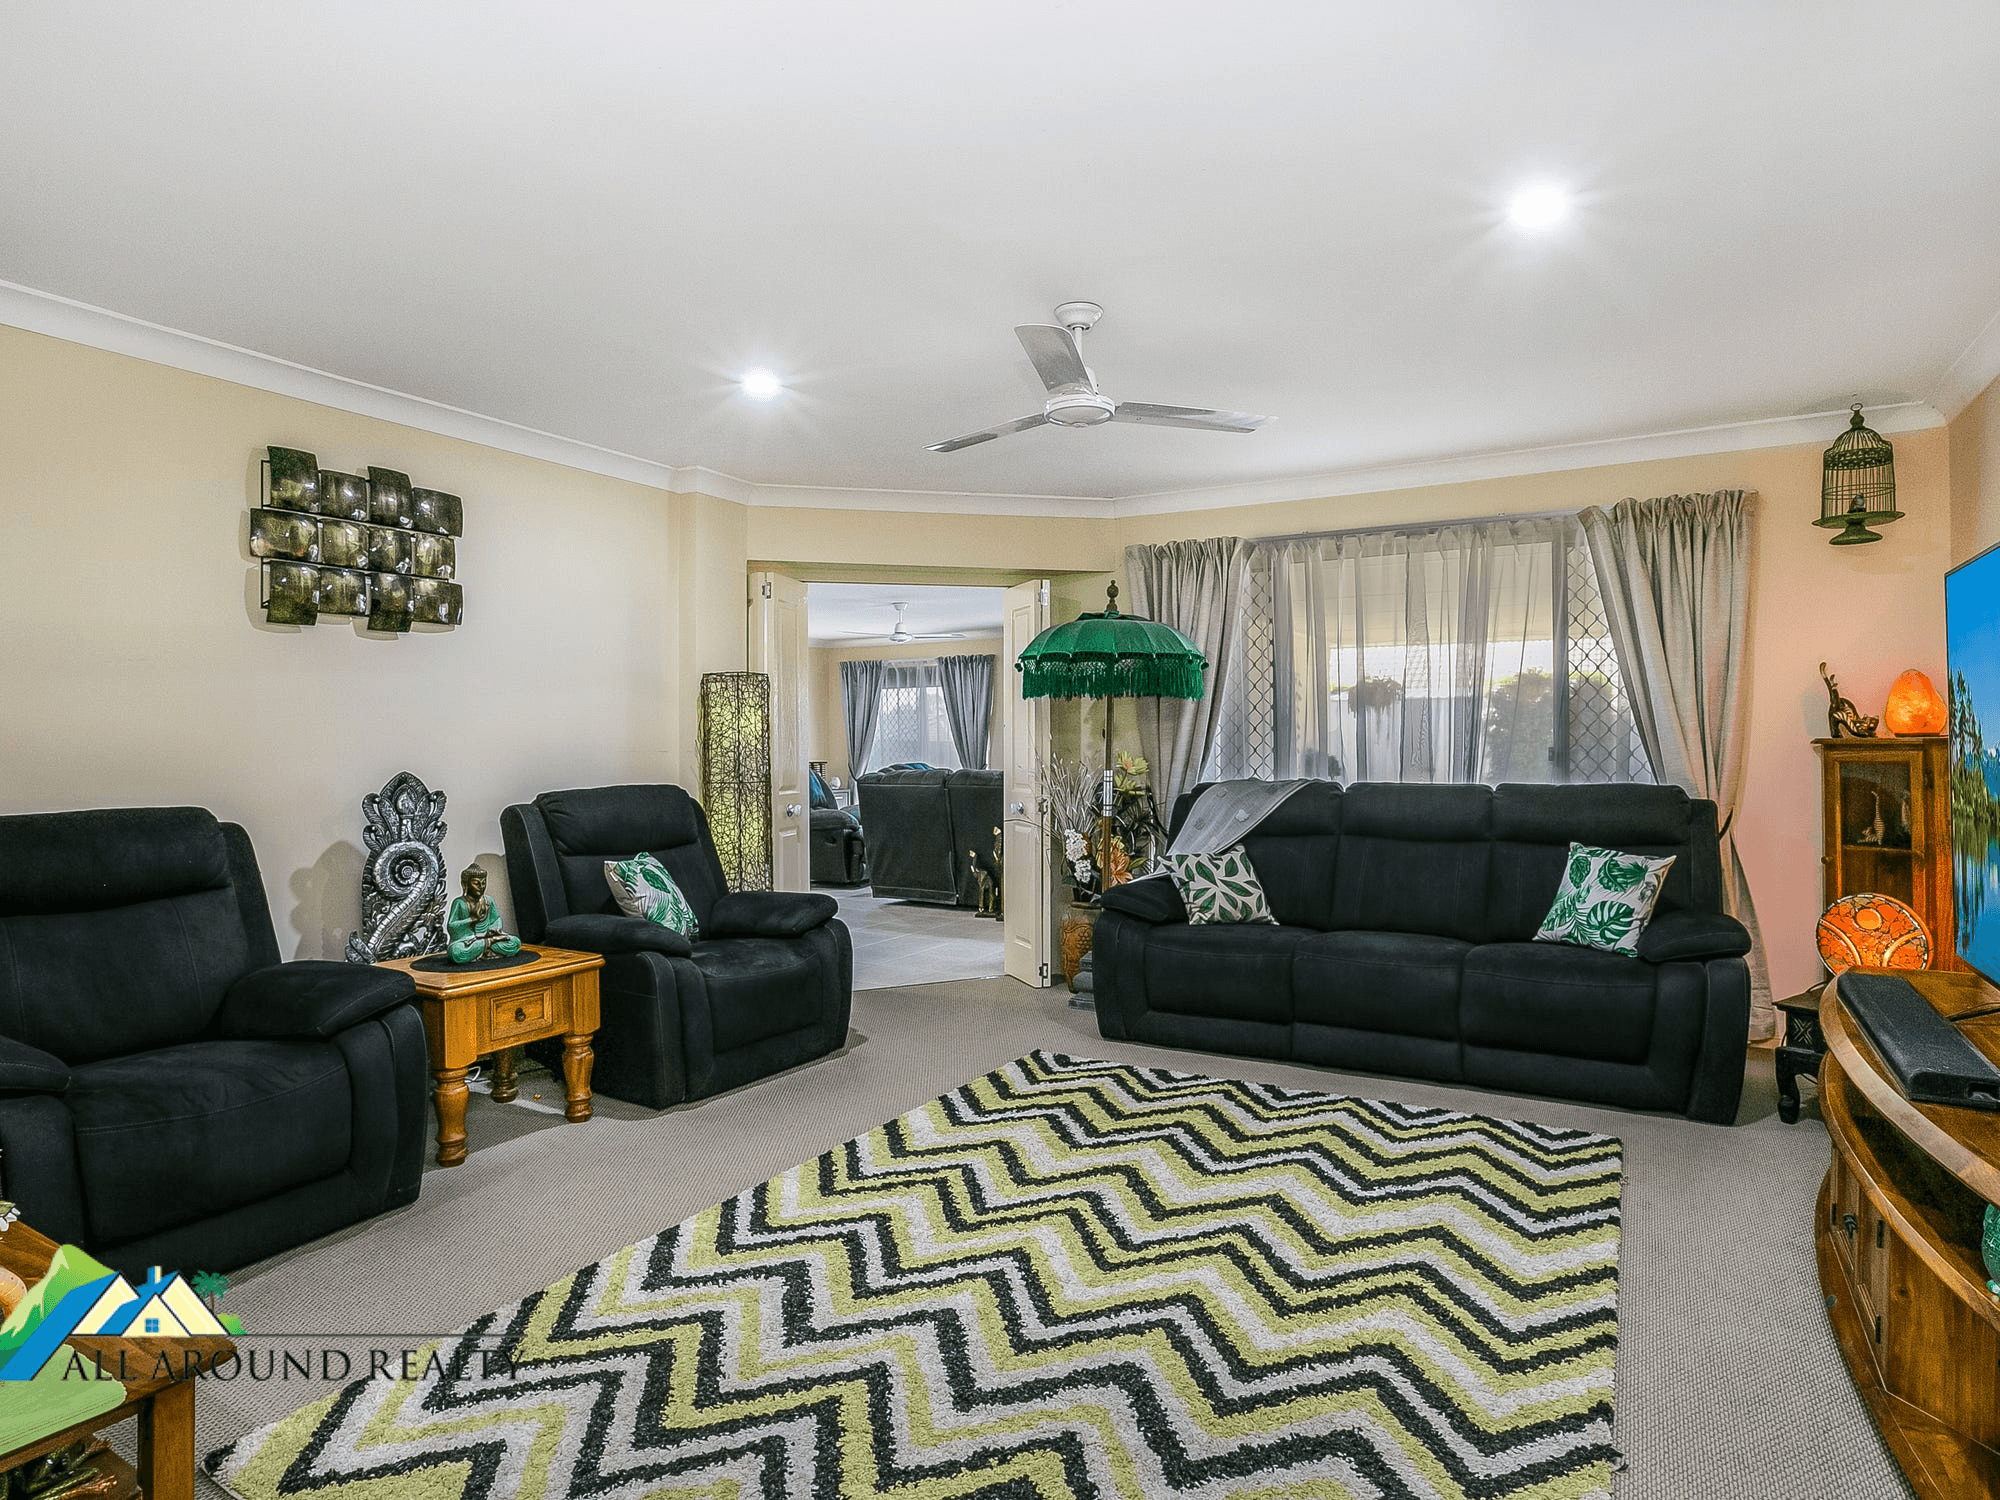 2 Willowleaf Circuit, Upper Caboolture, QLD 4510